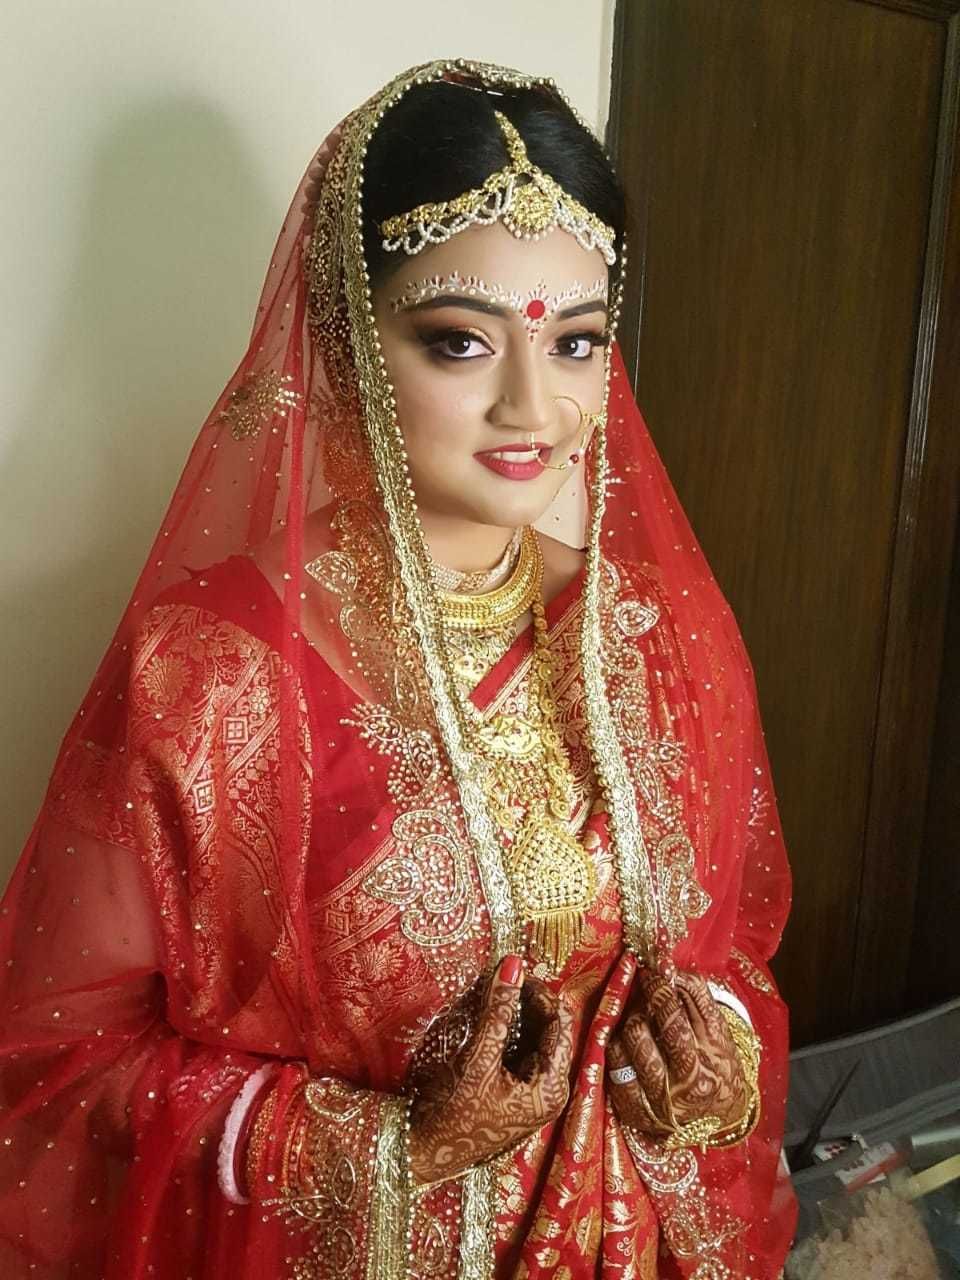 Photo From Doesn't she look like a regal Beauty of Bengal?Bridal makeup by "Tanya Puri". - By Tanya's L'Oreal Salon